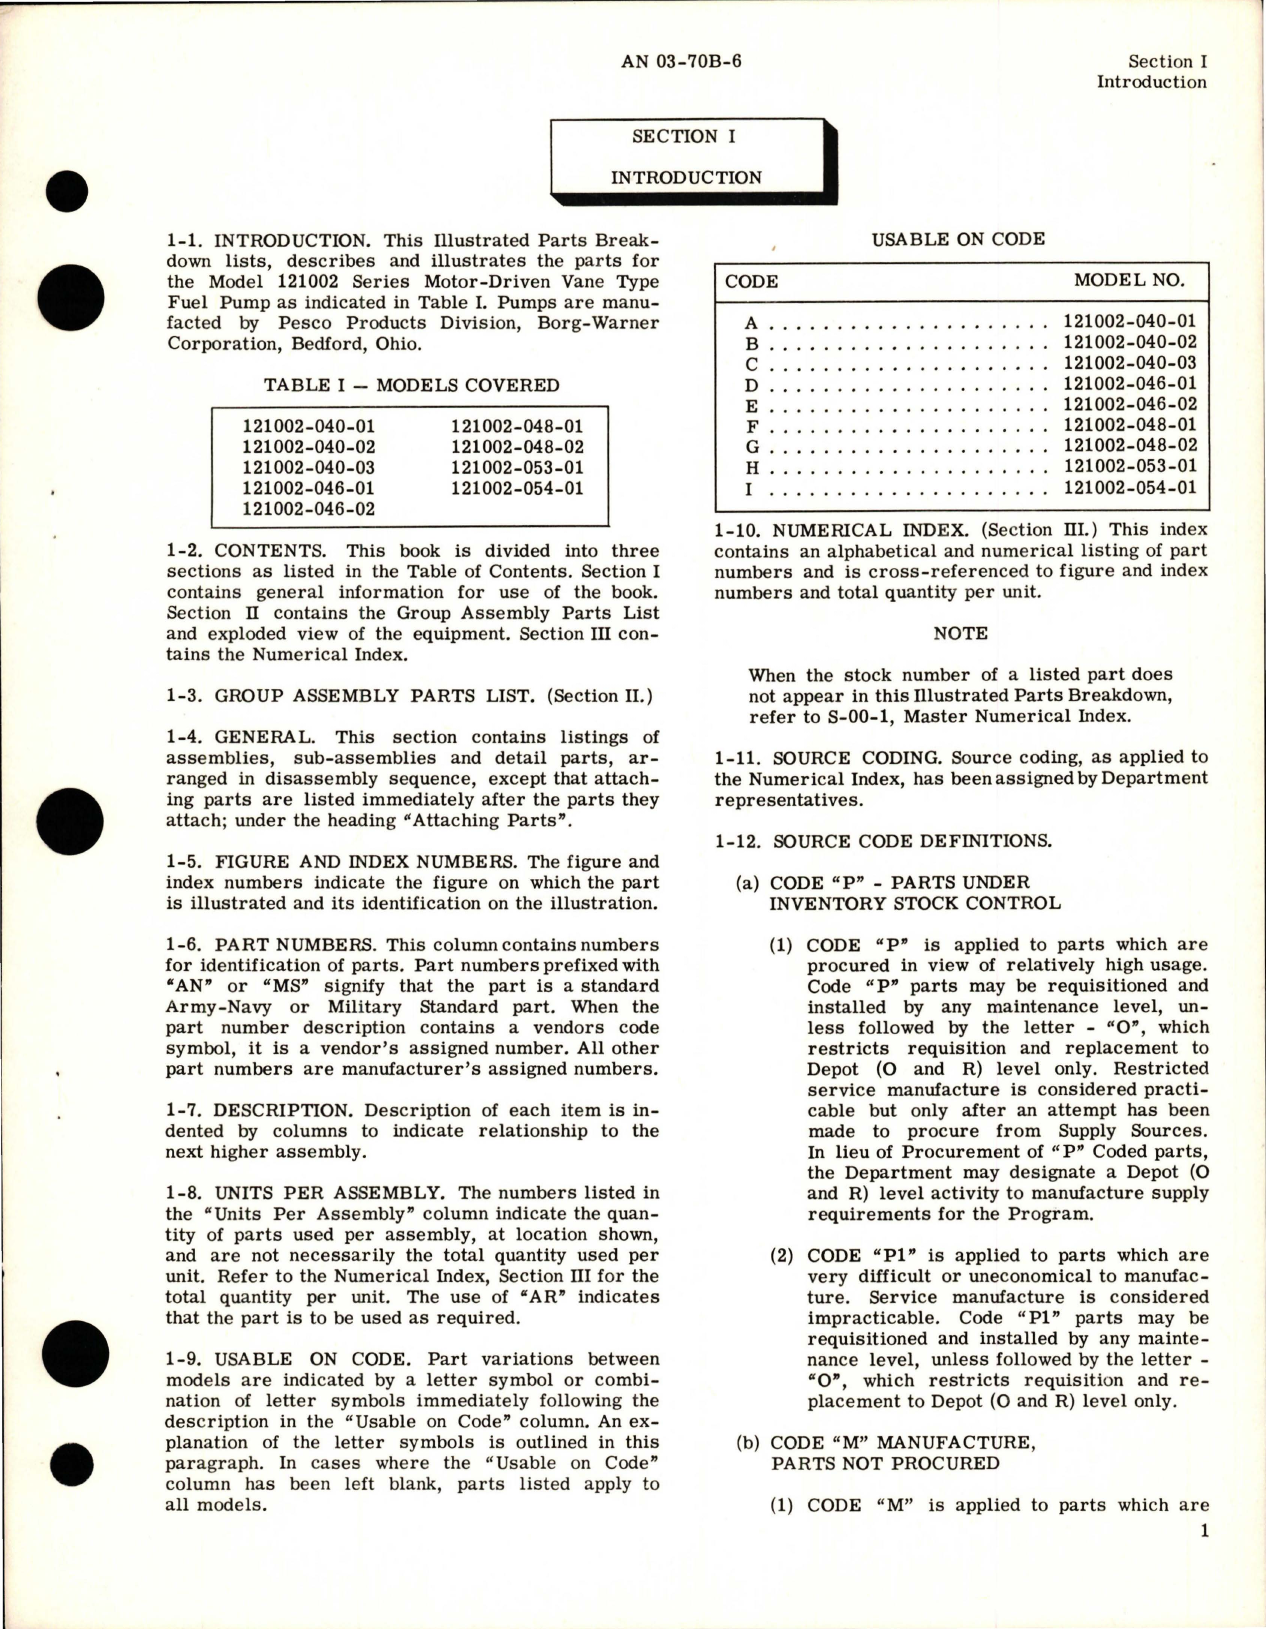 Sample page 5 from AirCorps Library document: Illustrated Parts Breakdown for Electric Motor Driven Fuel Pump - 121002 Series 